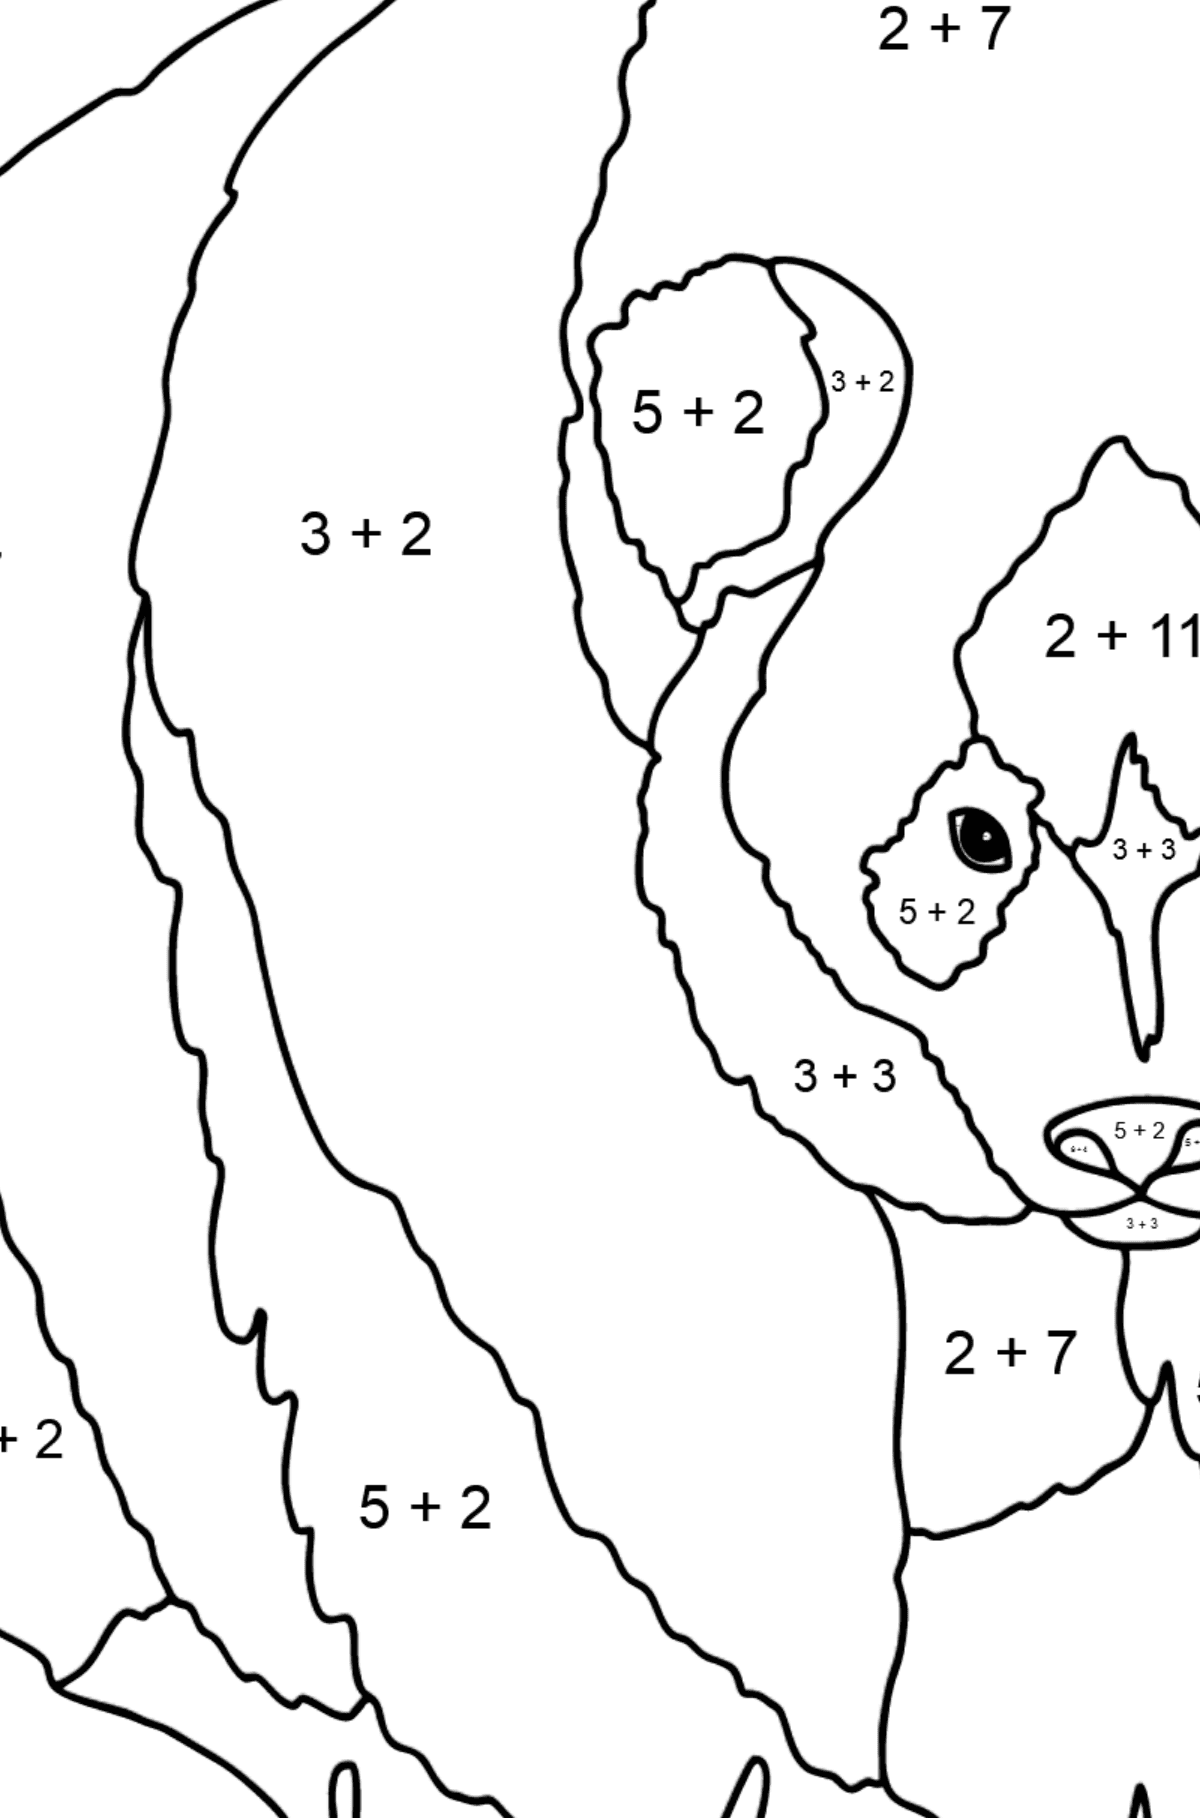 Coloring Page - A Panda is on a Hunt - Math Coloring - Addition for Kids